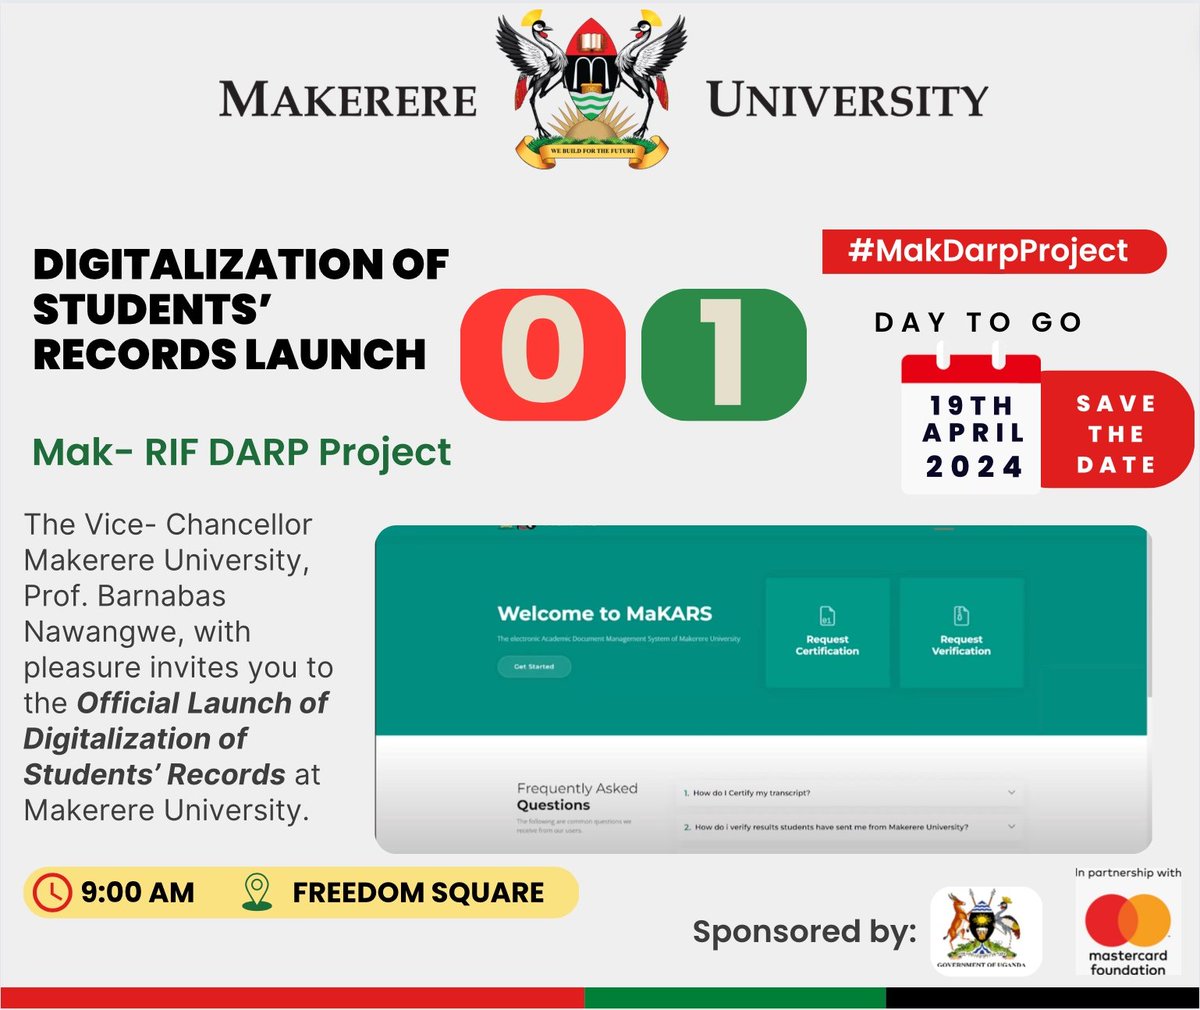 #MakDarpProject has implemented stringent measures to guarantee data availability, integrity, and confidentiality within the new system. Users can now effortlessly retrieve, upload, and track documents, streamlining operations. Certification and verification requests are now…